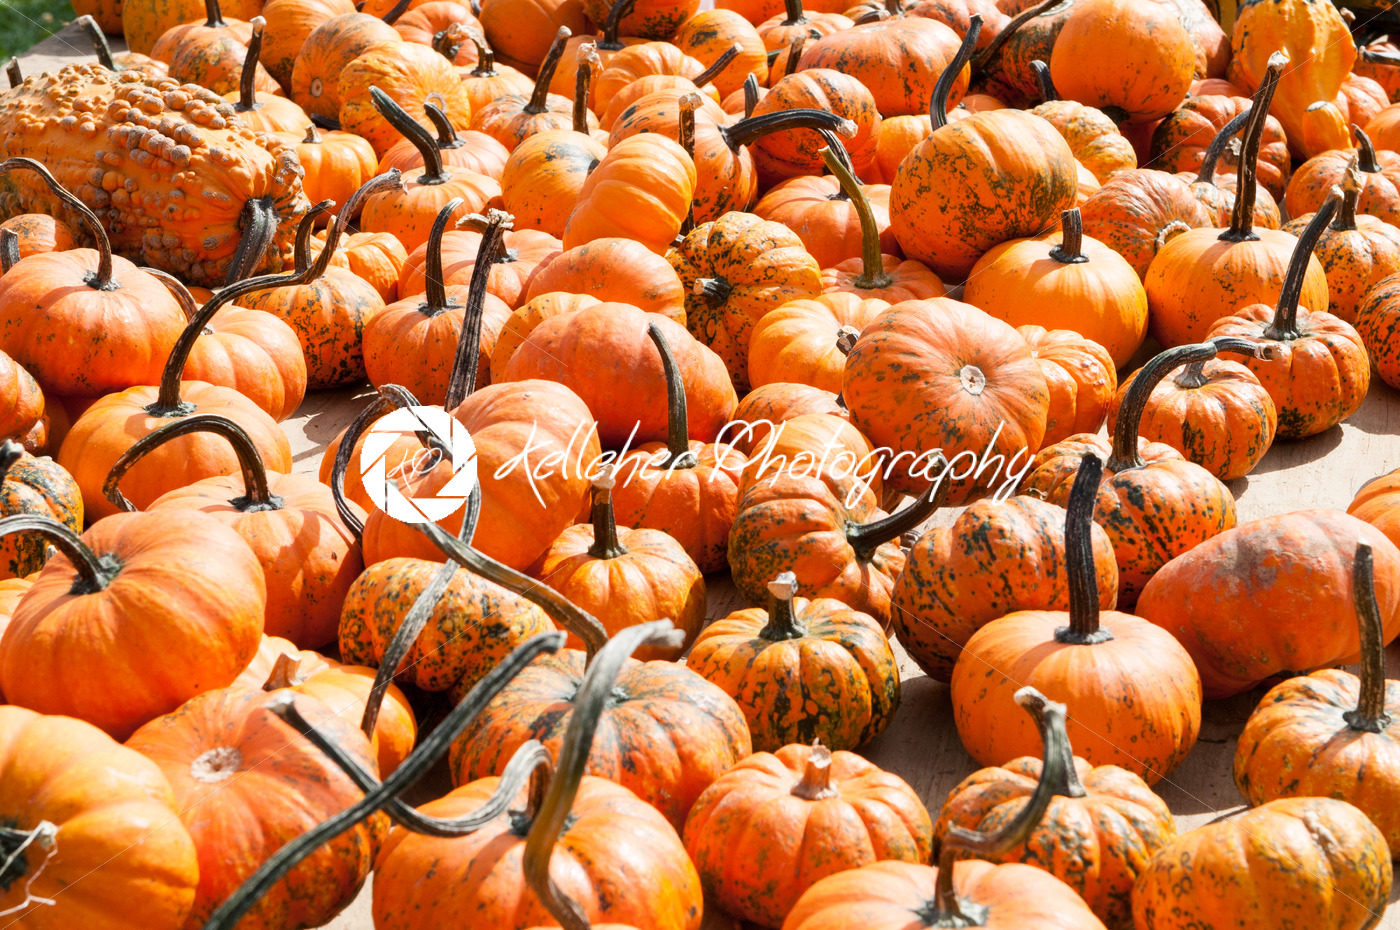 Various Pumpkins on table during fall - Kelleher Photography Store